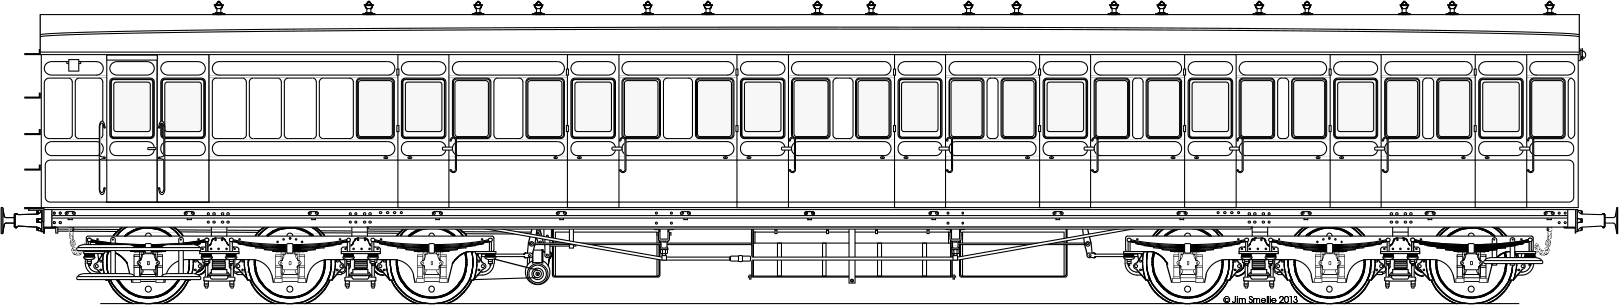 Scale drawing of D103